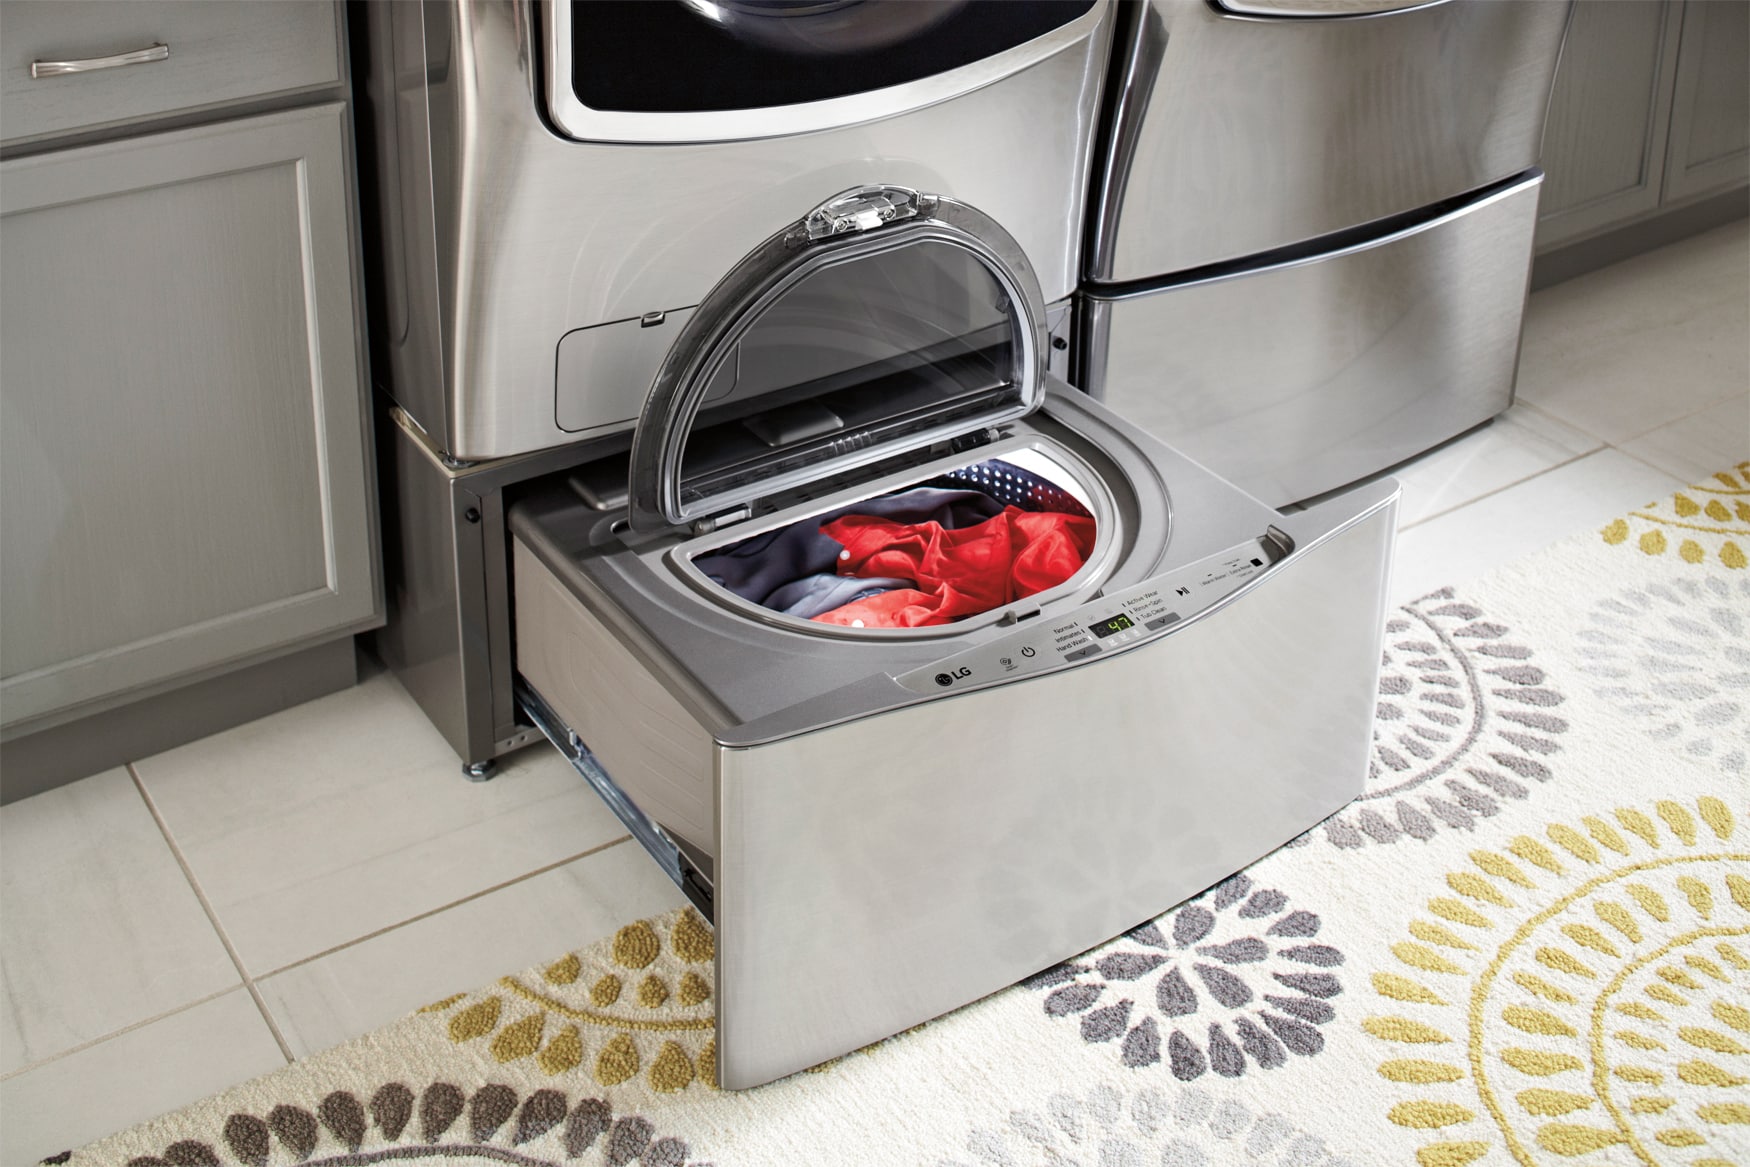 LG Front Load Laundry Machines at Best Buy! @BestBuy @LGUS #ad